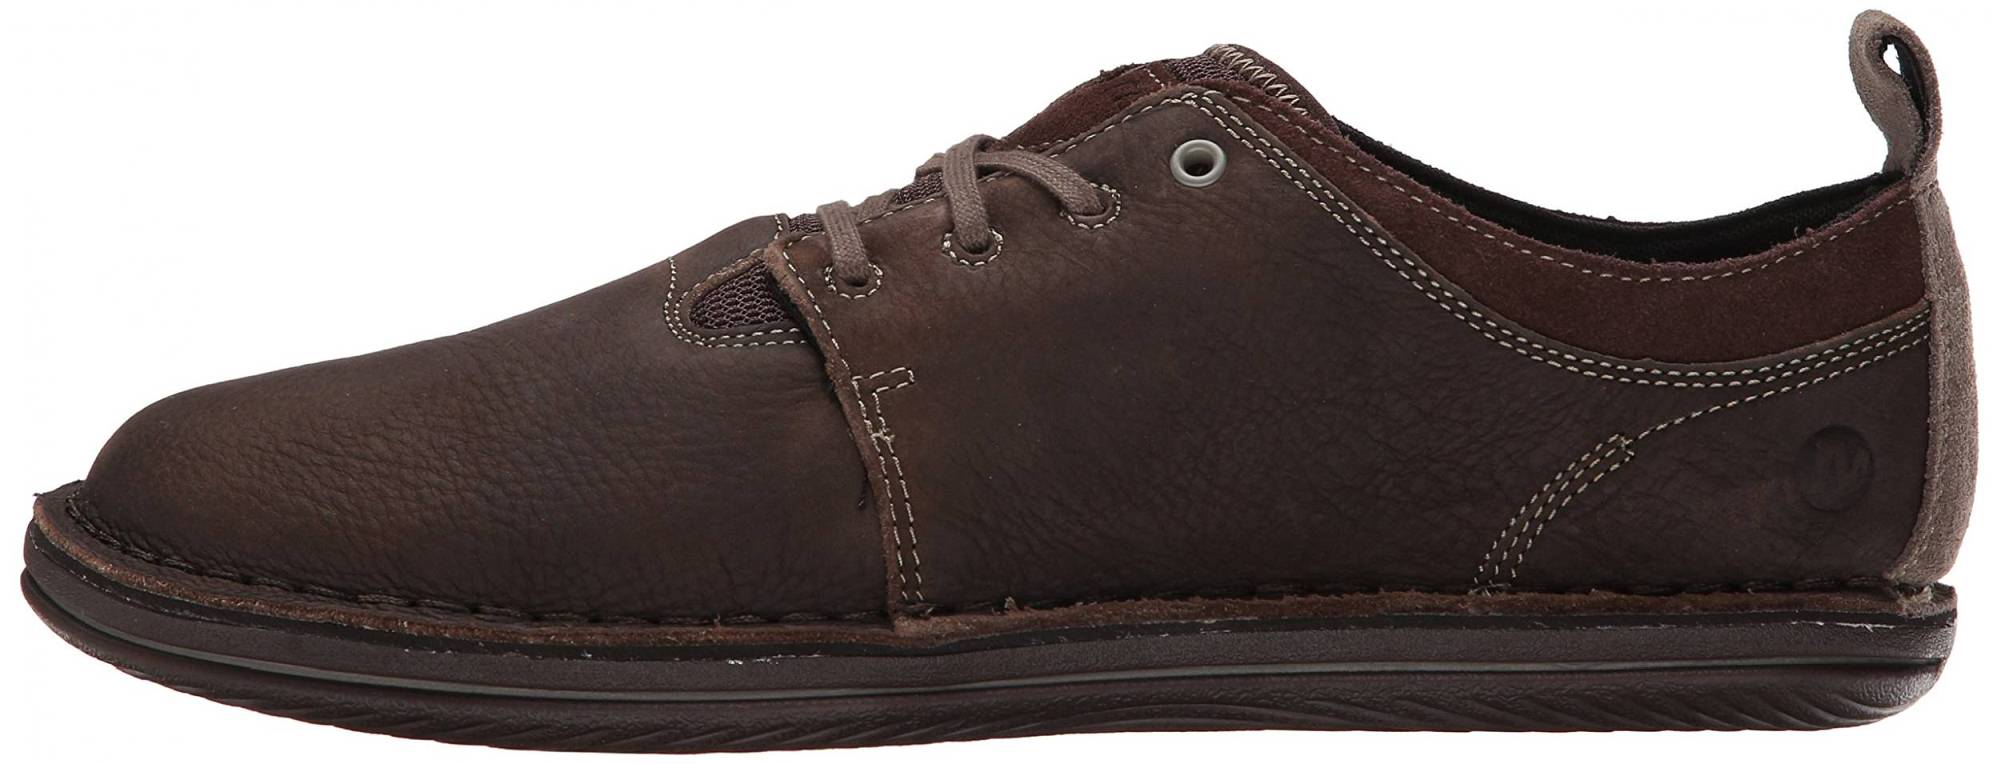 Merrell Bask Sol – Shoes Reviews & Reasons To Buy